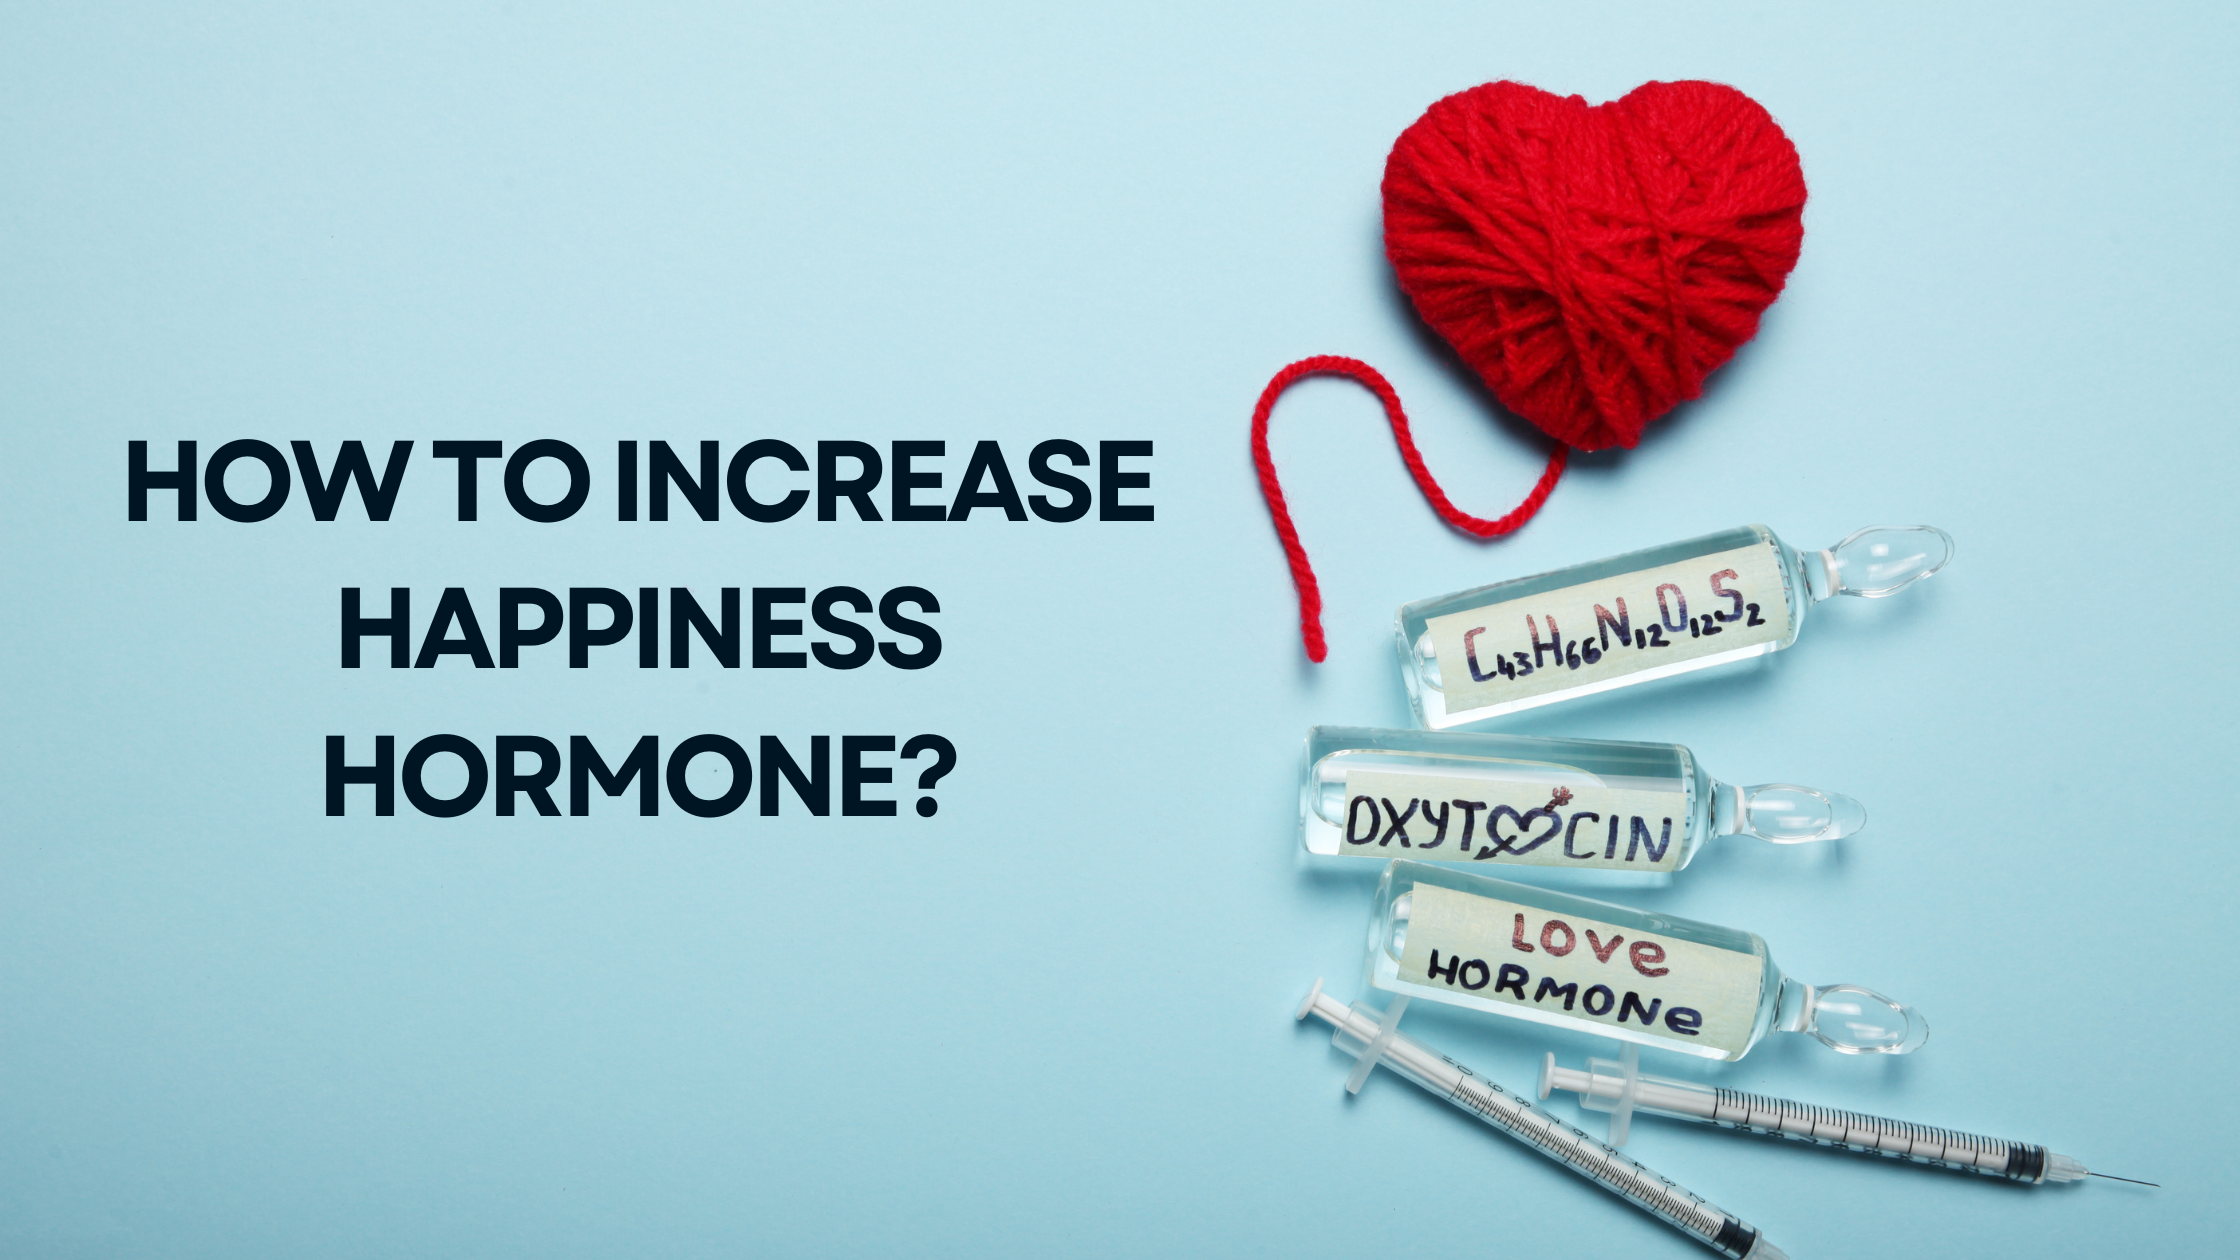 How to Increase Happiness Hormone